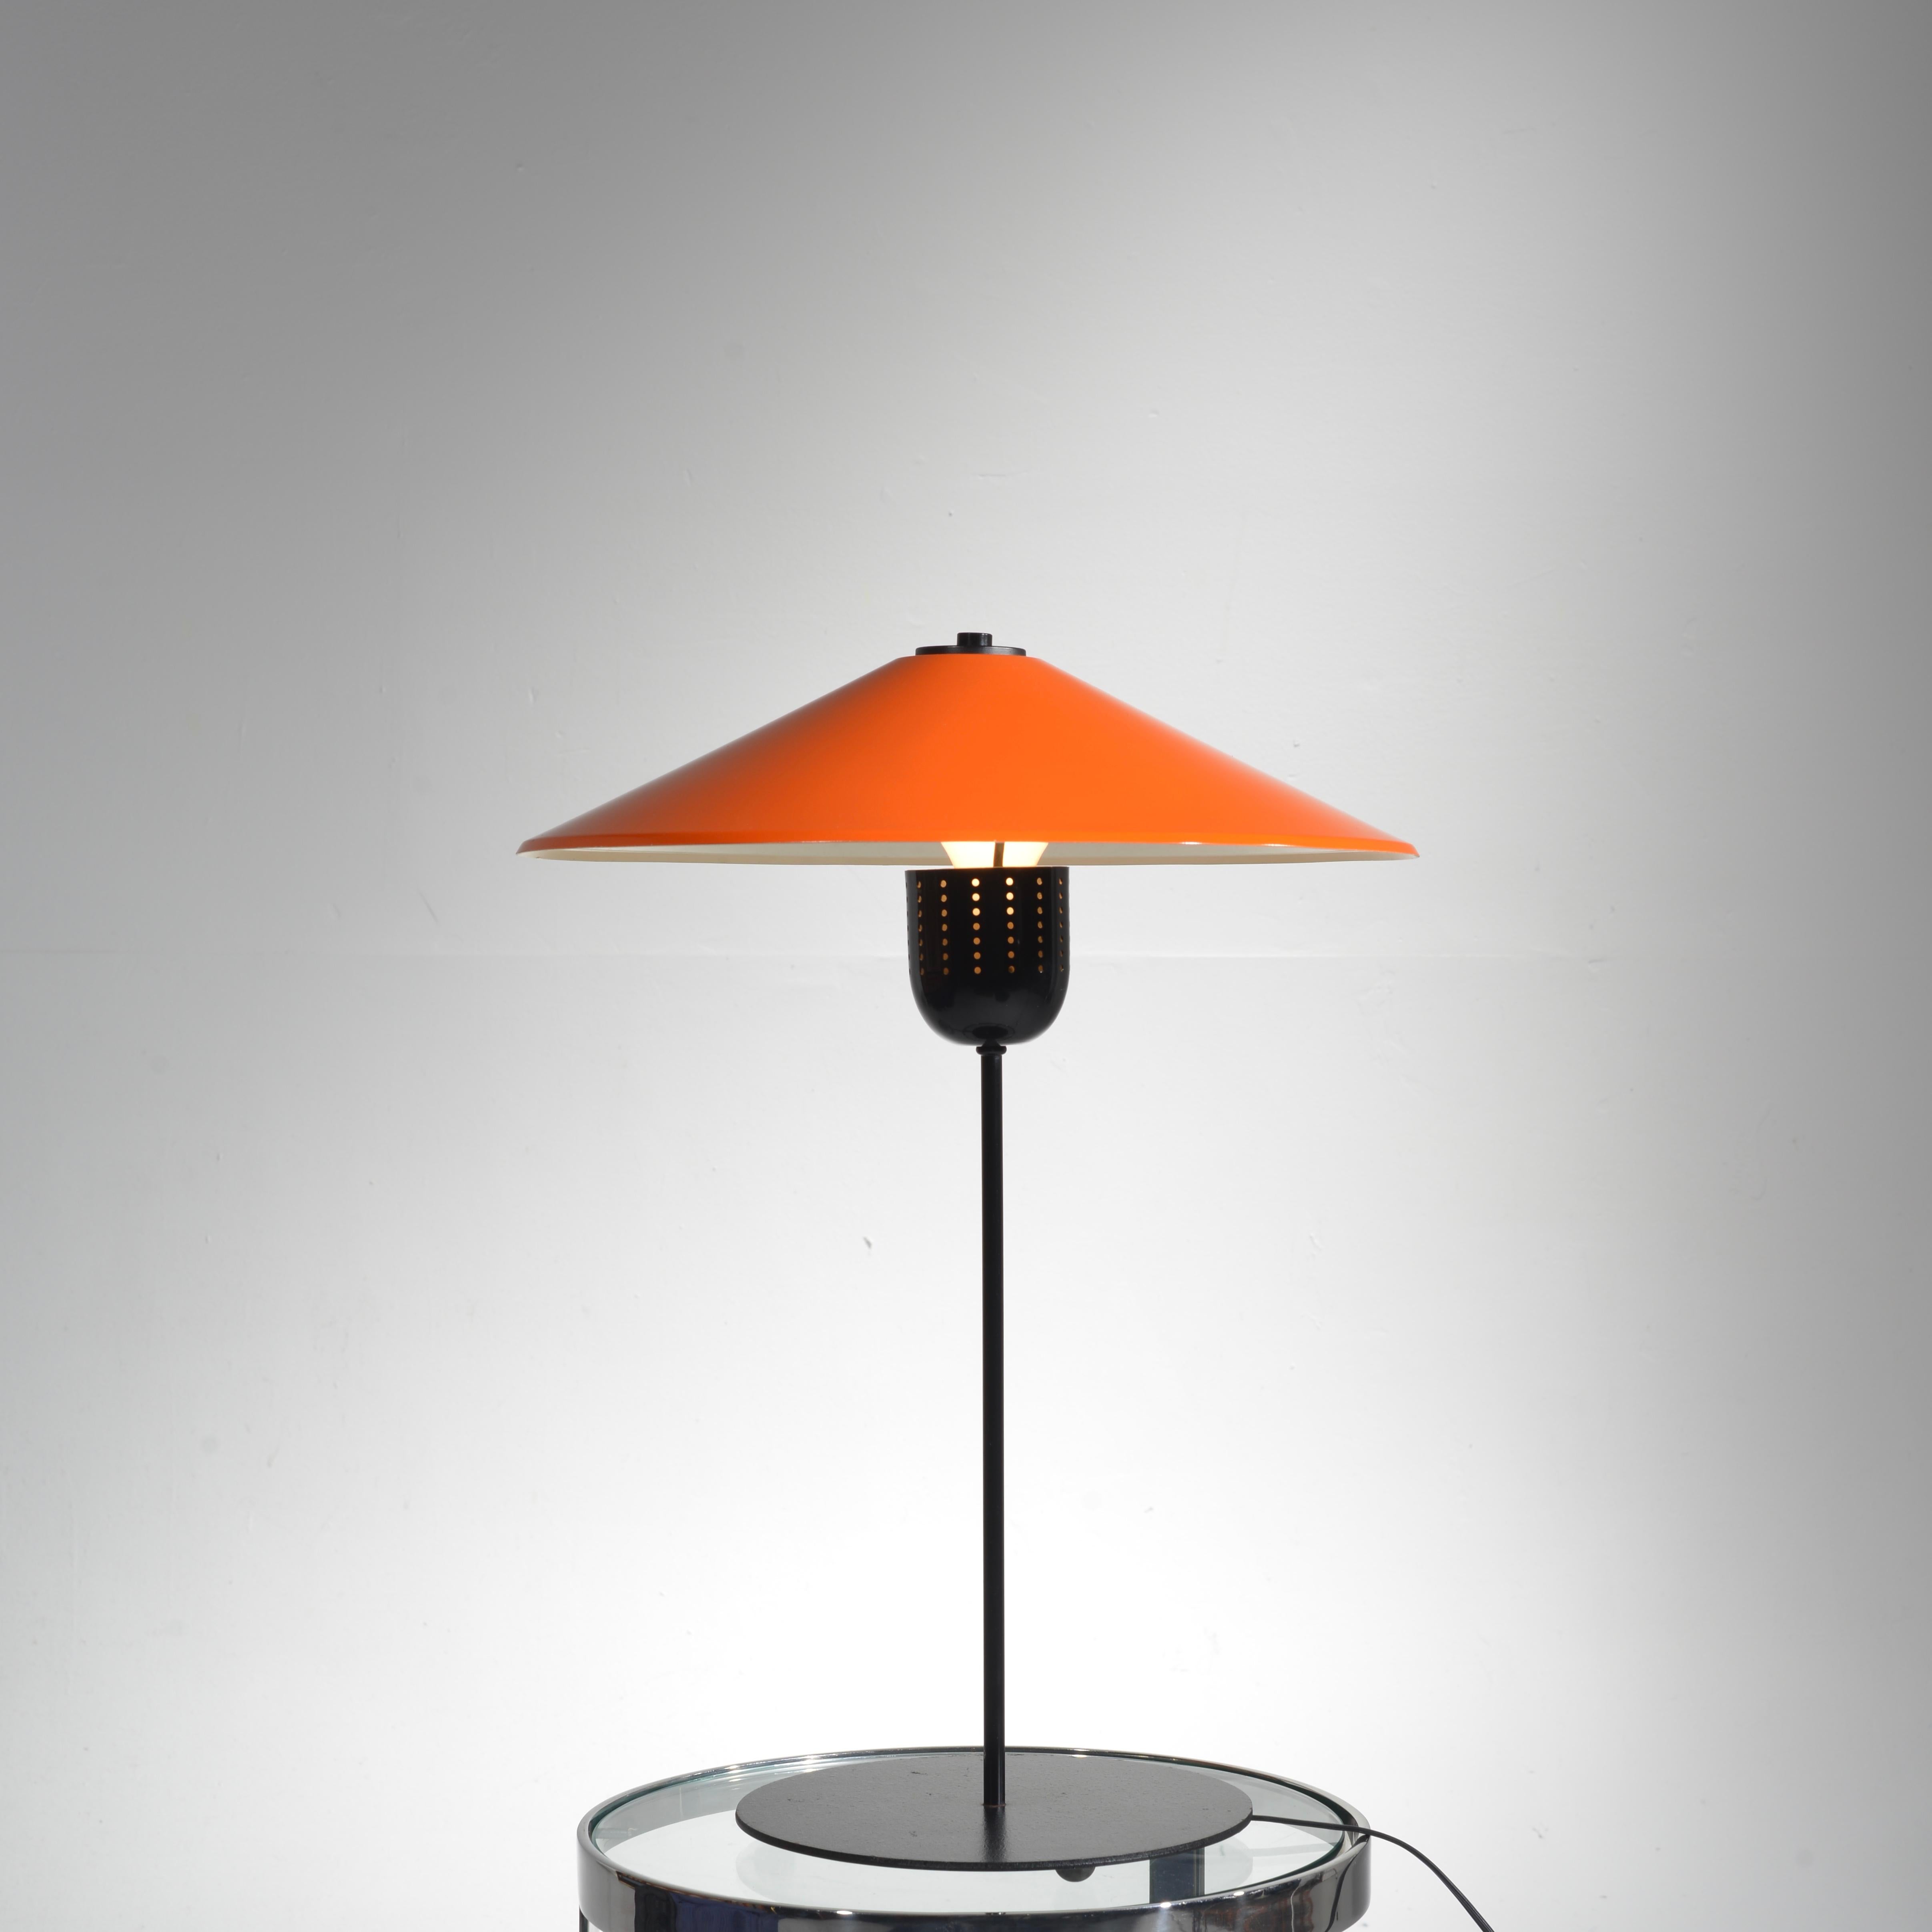 This beautiful orange Danish modern table lamp is in excellent condition. The shade can tilt at different angles.